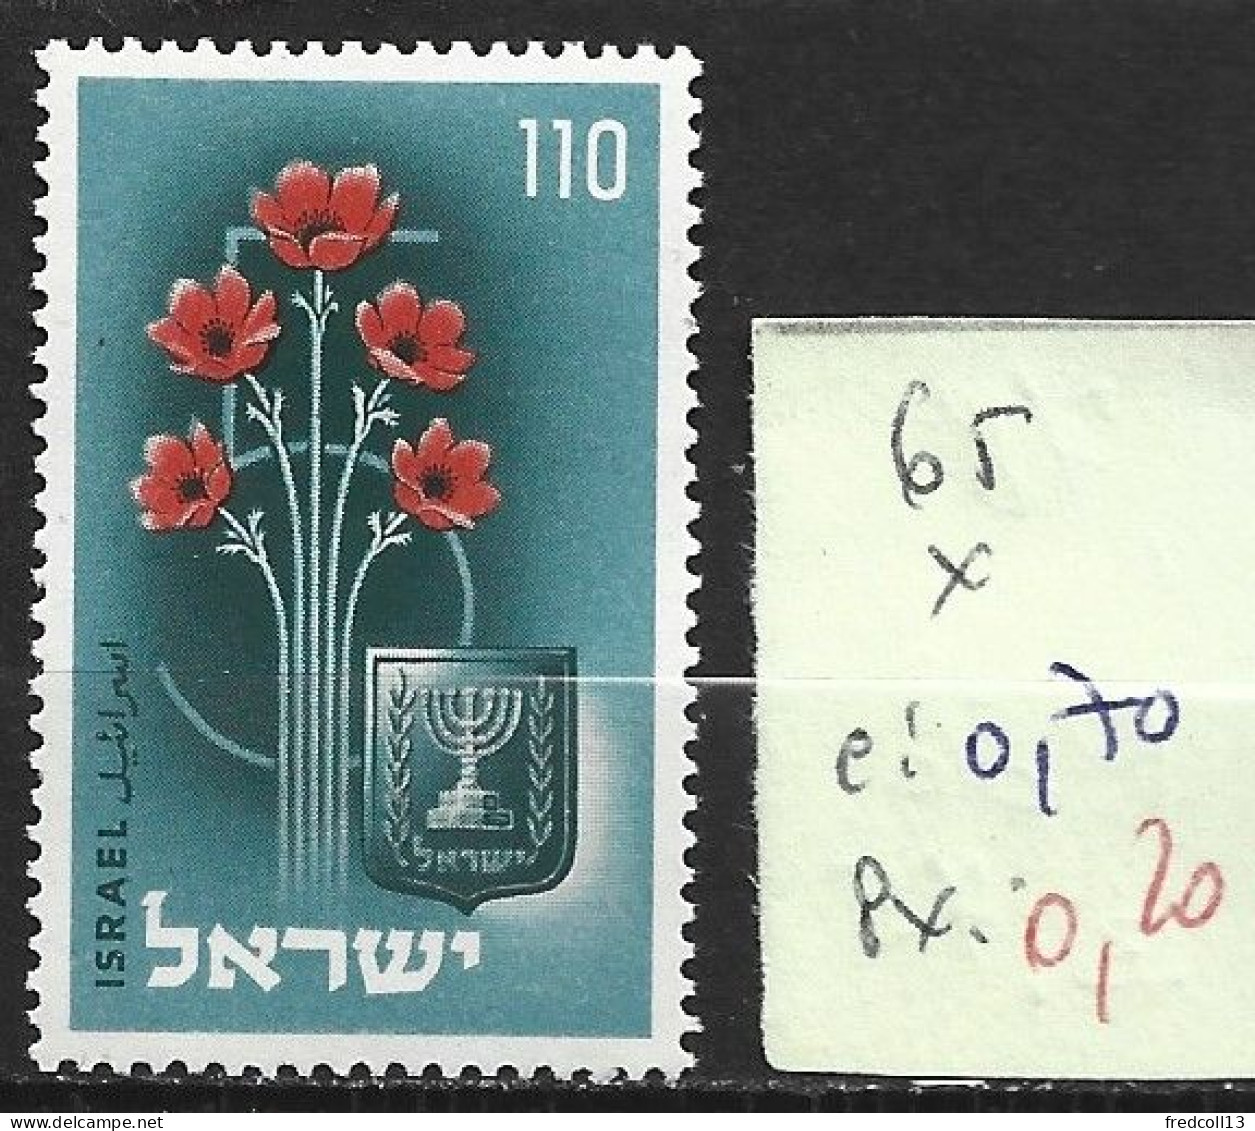 ISRAEL 65 * Côte 0.70 € - Unused Stamps (without Tabs)